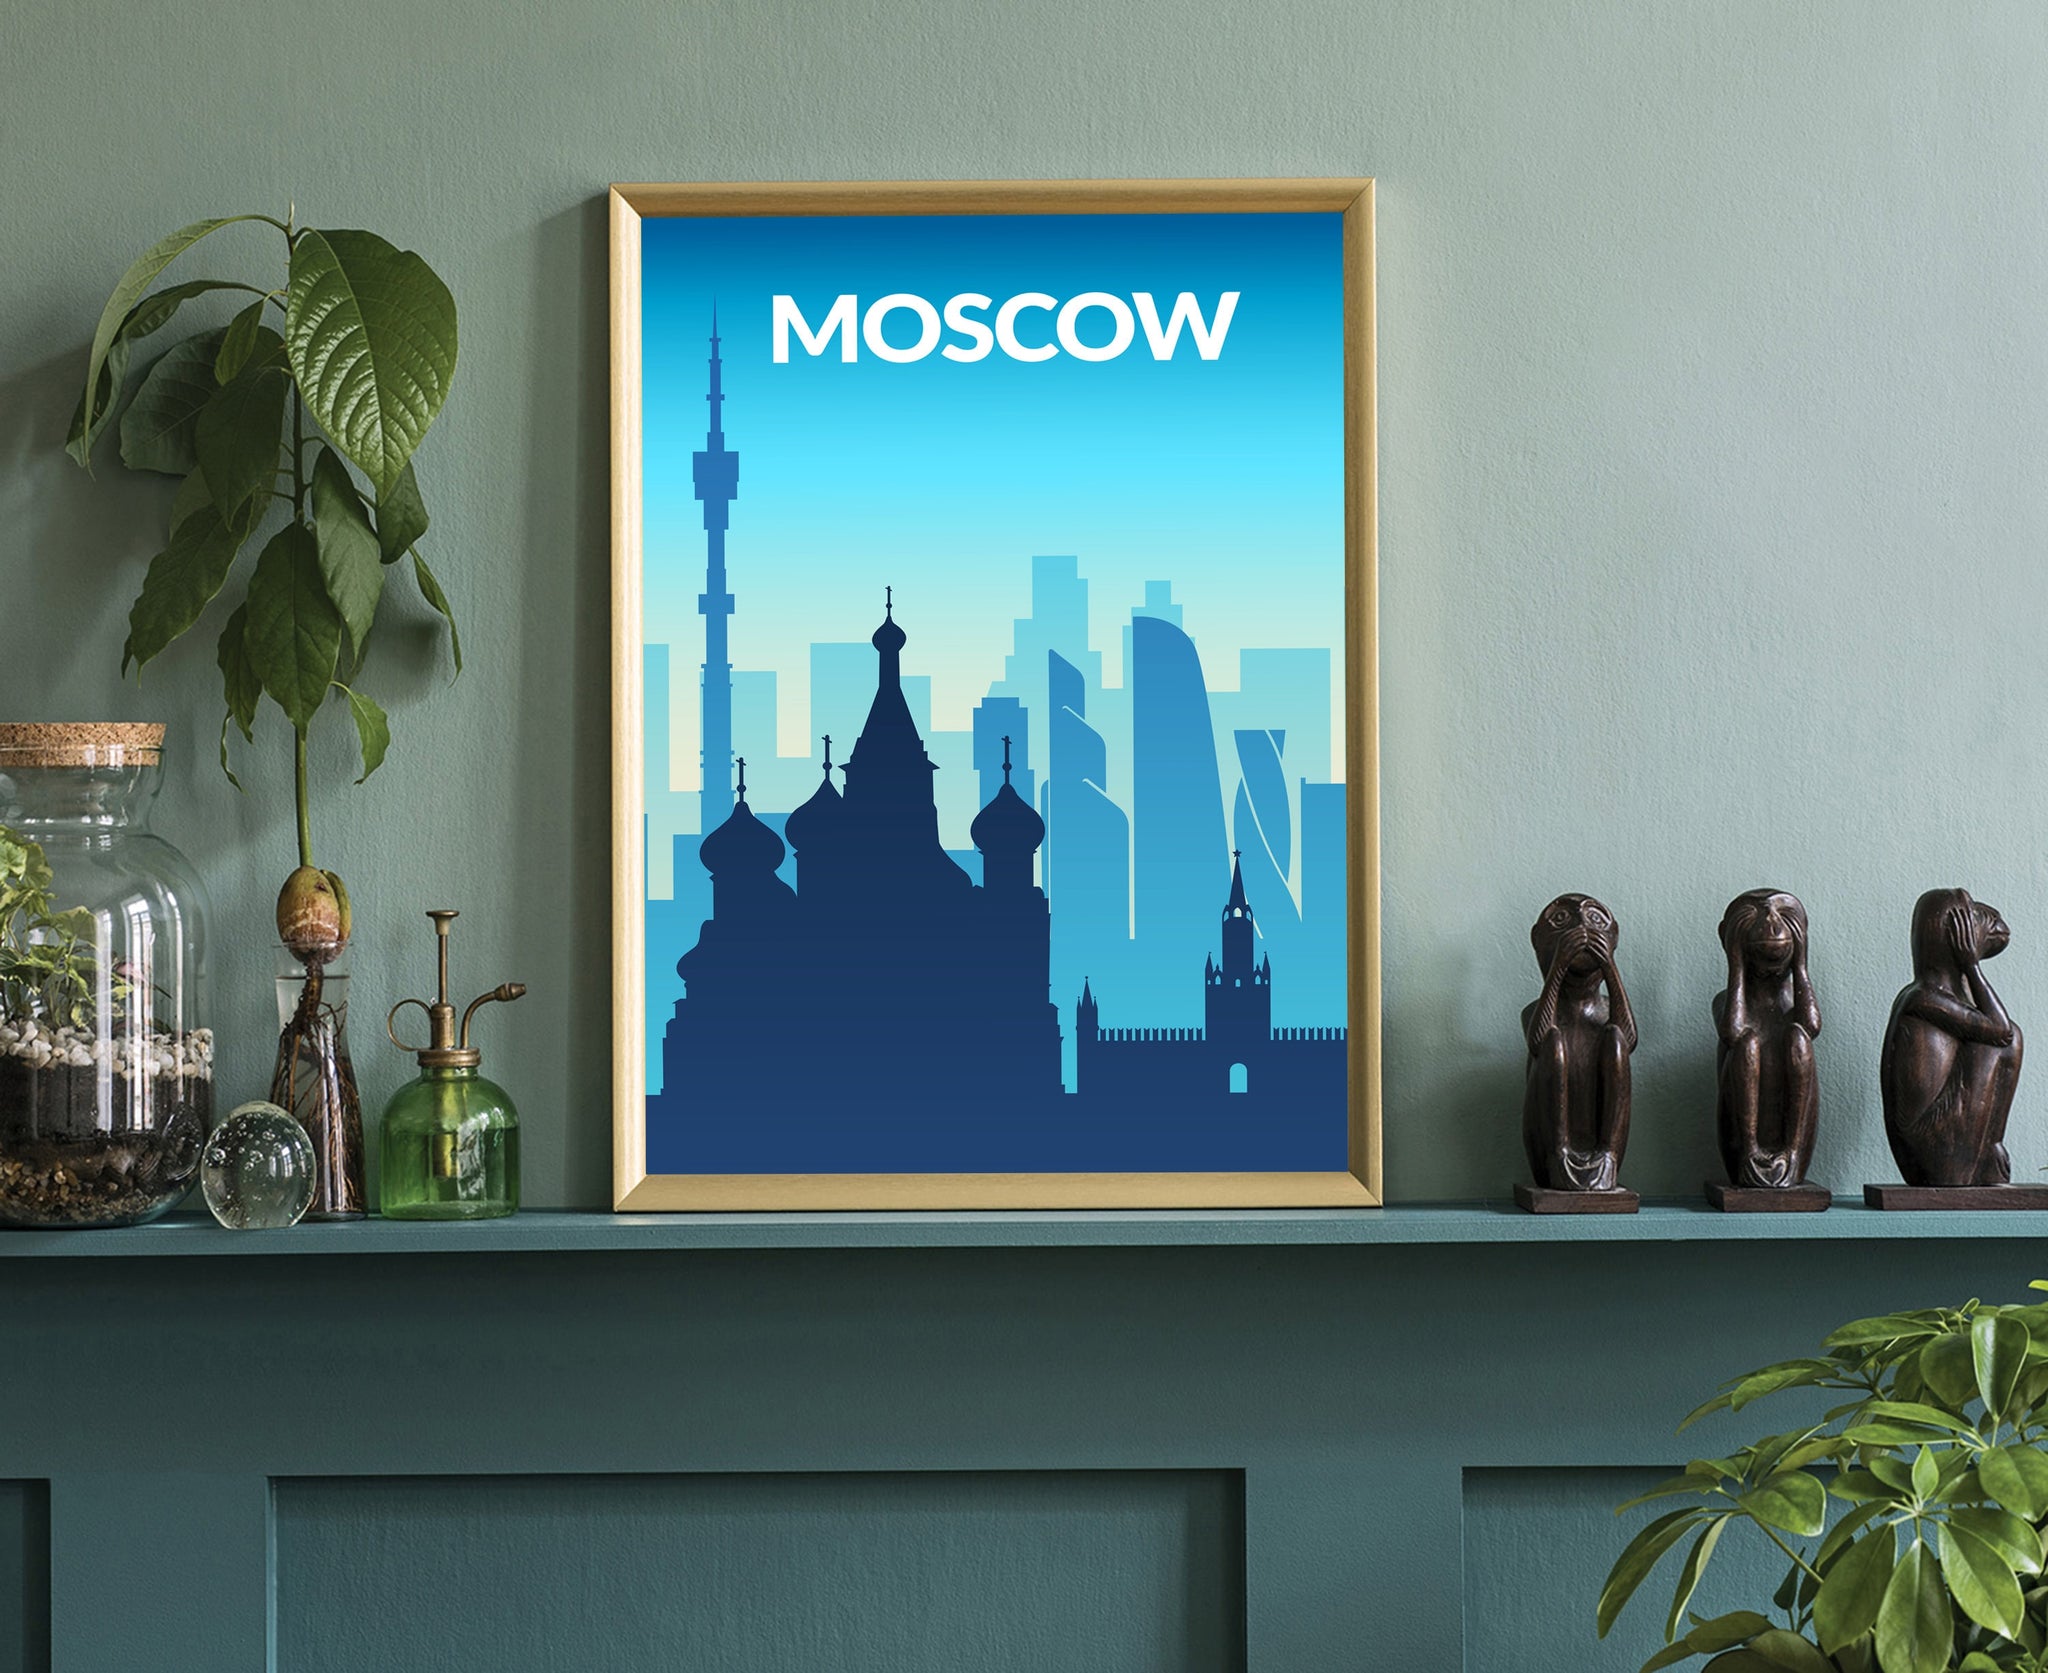 Solid Color World City Poster, Russia Moscow Solid Color Modern Poster Print, Moscow Modern City Poster, Office and Home Wall Decoration